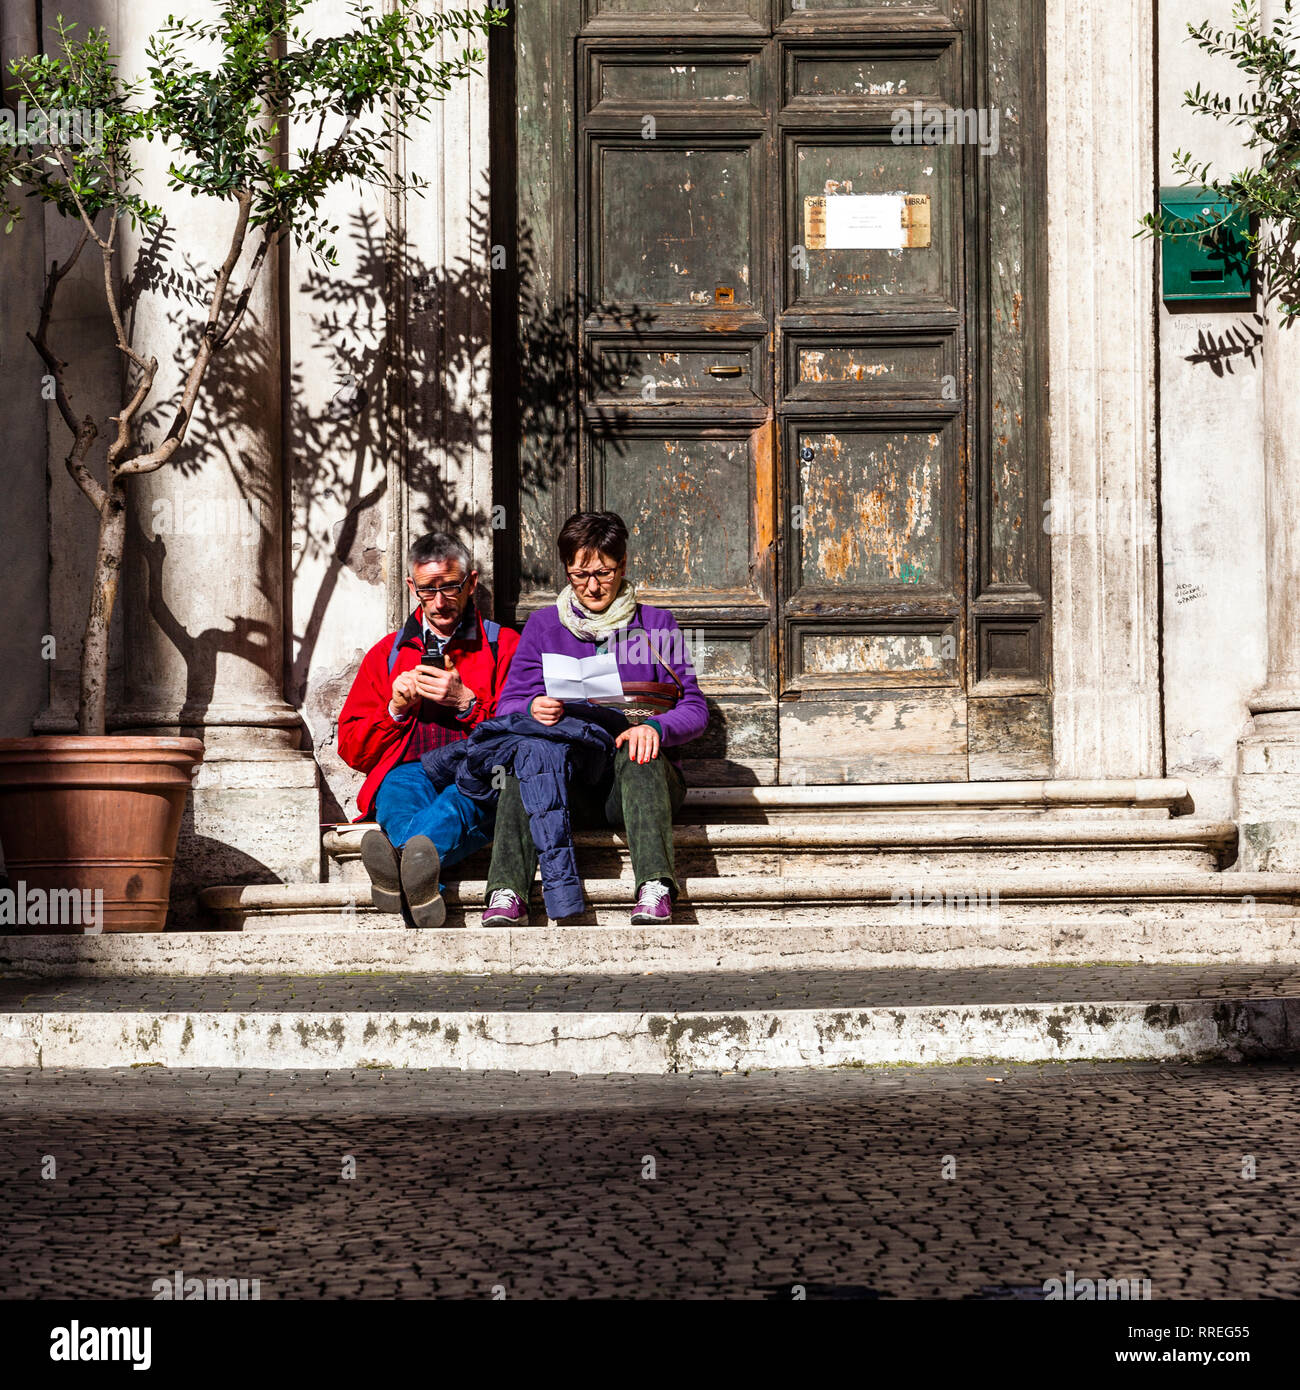 Couple sitting in Rome le lecture strairs Banque D'Images